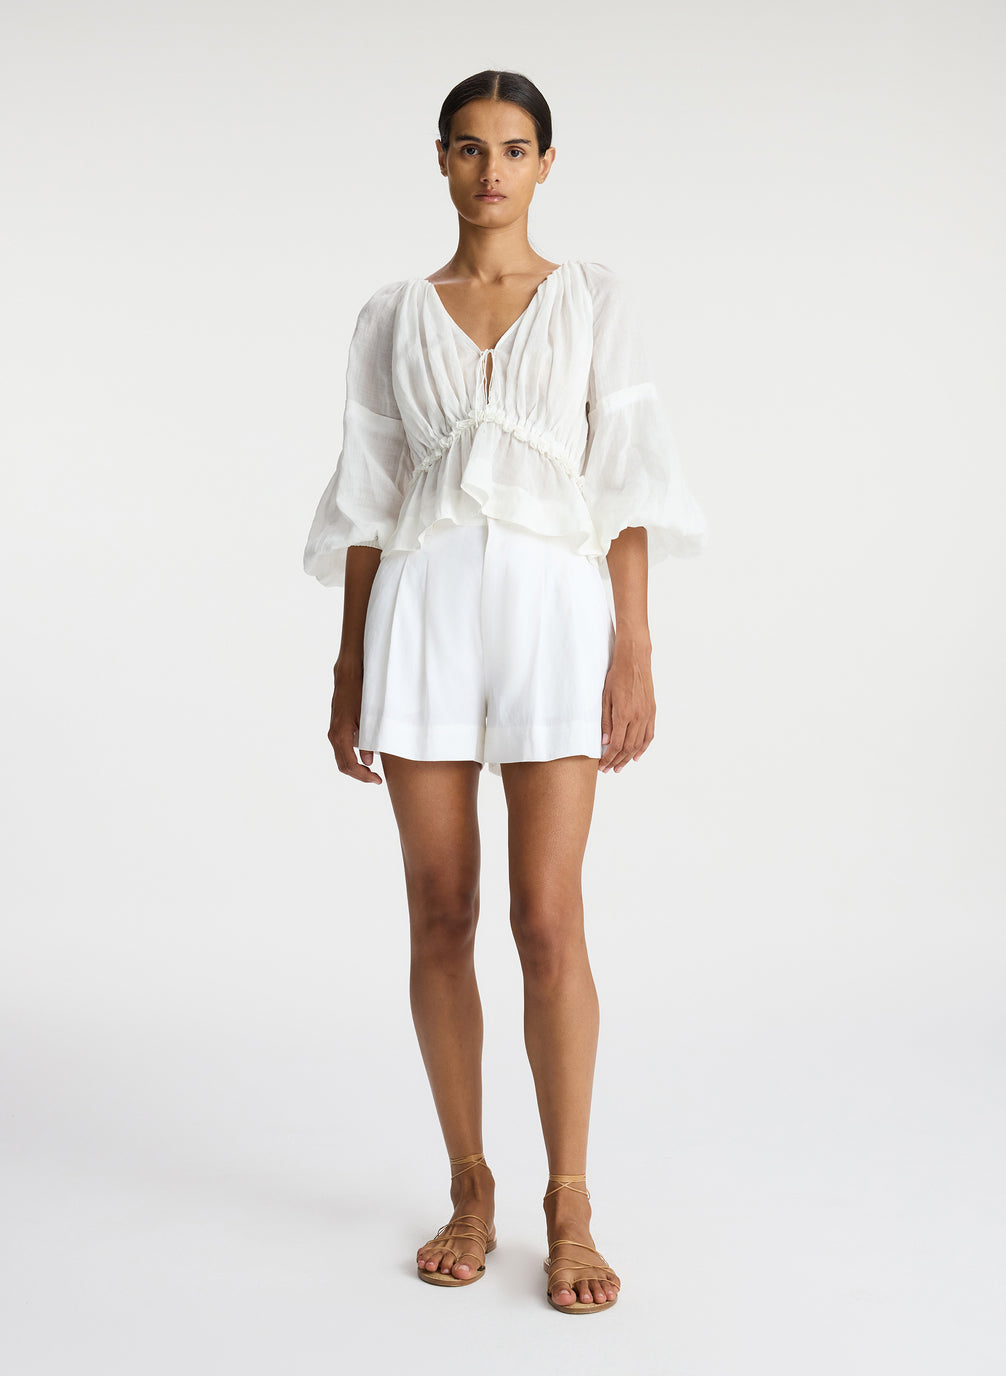 front view of woman wearing white blouse and white shorts